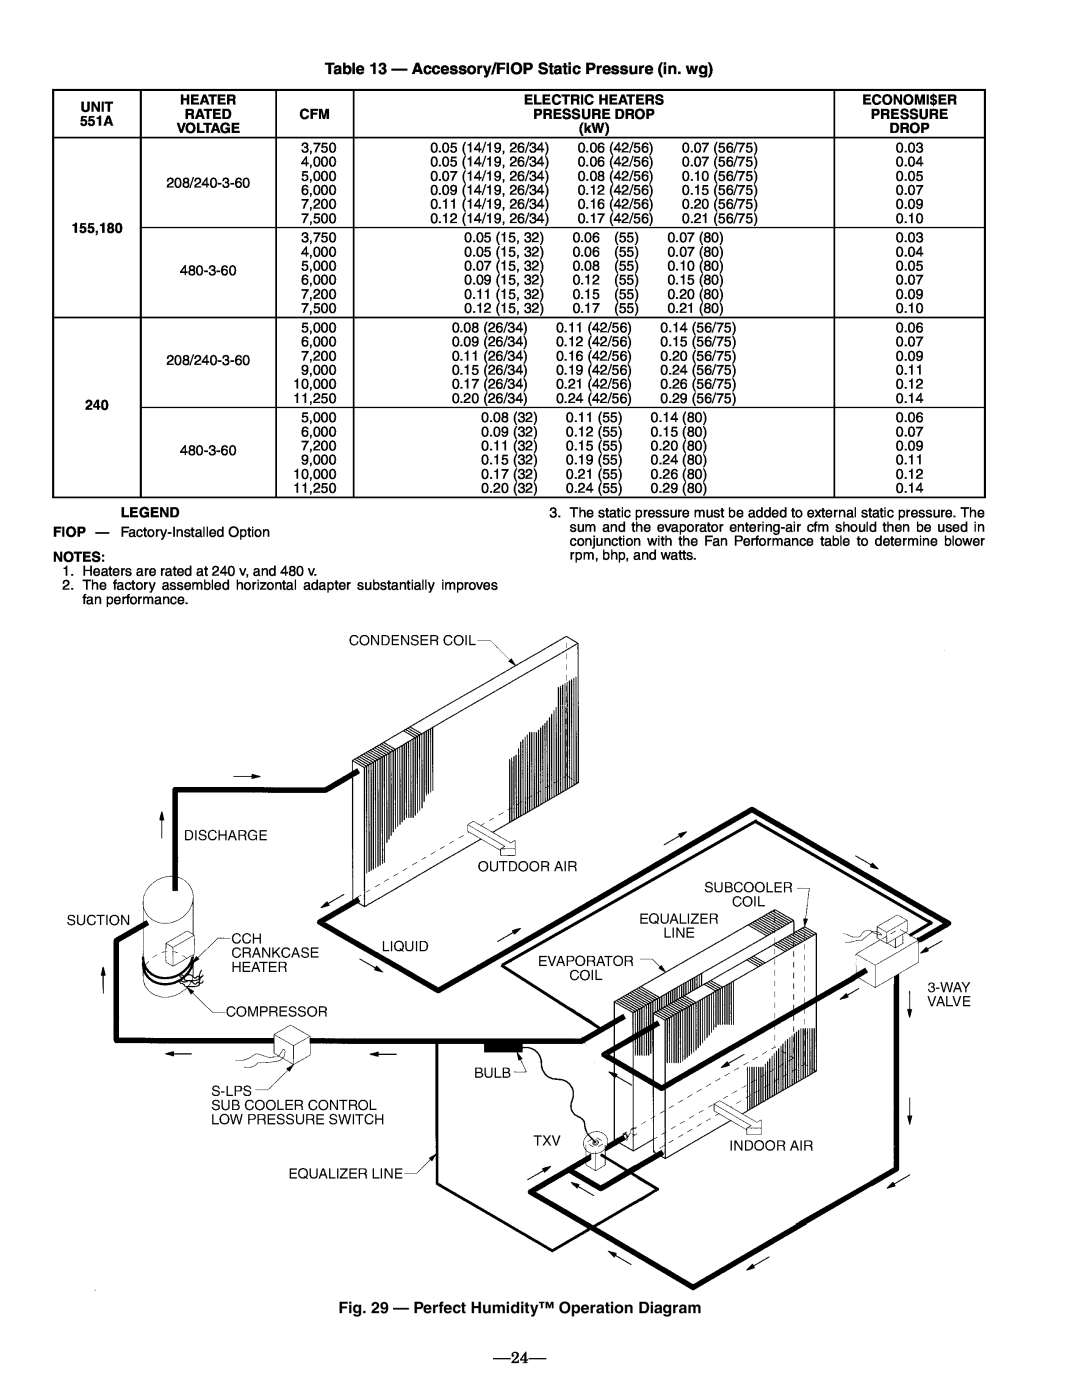 Bryant 551A operation manual 24, Accessory/FIOP Static Pressure in. wg, Perfect Humidity Operation Diagram 